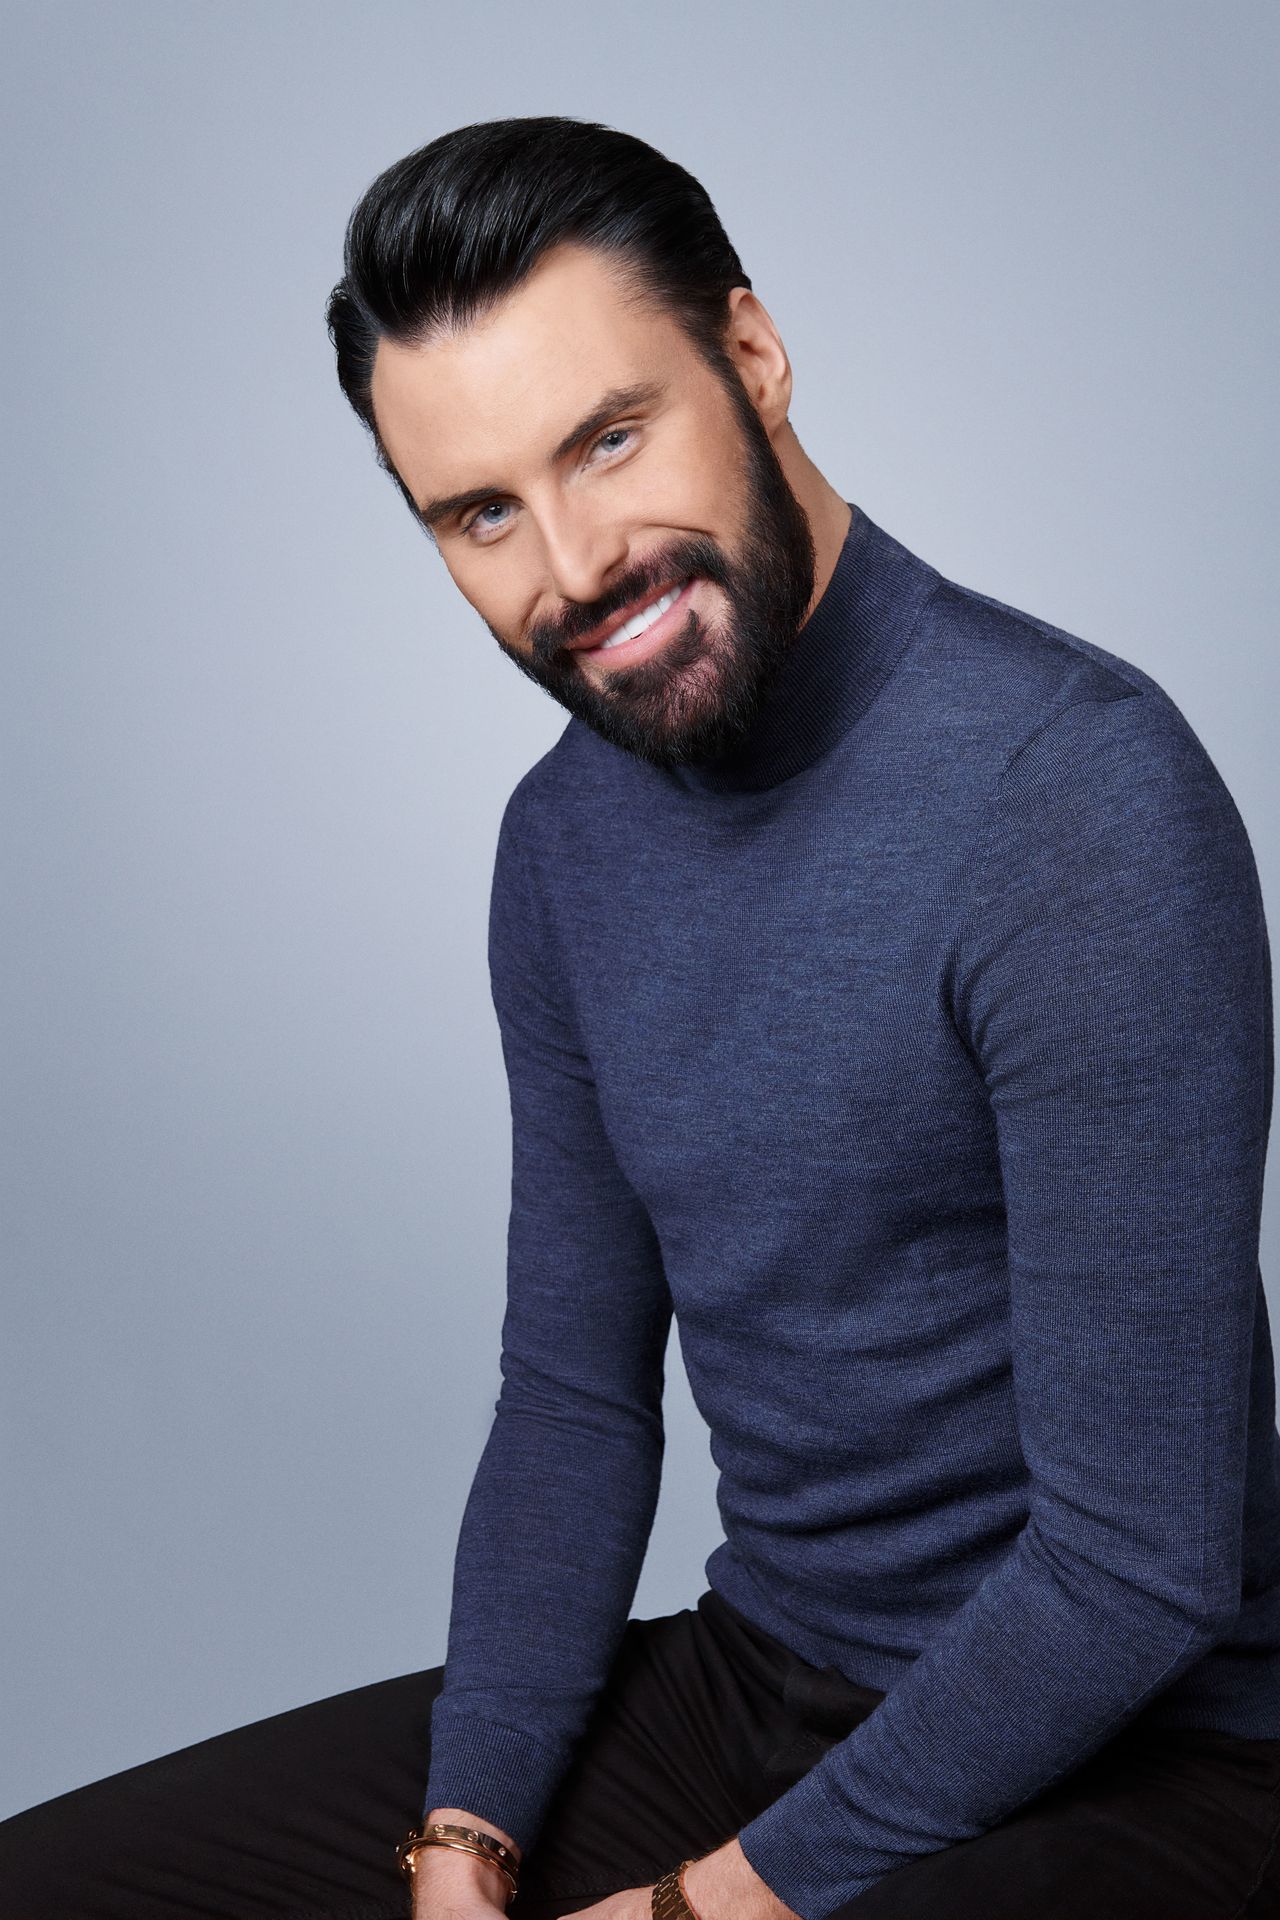 "A new me," Rylan Clark says of the latest era of his professional and personal life